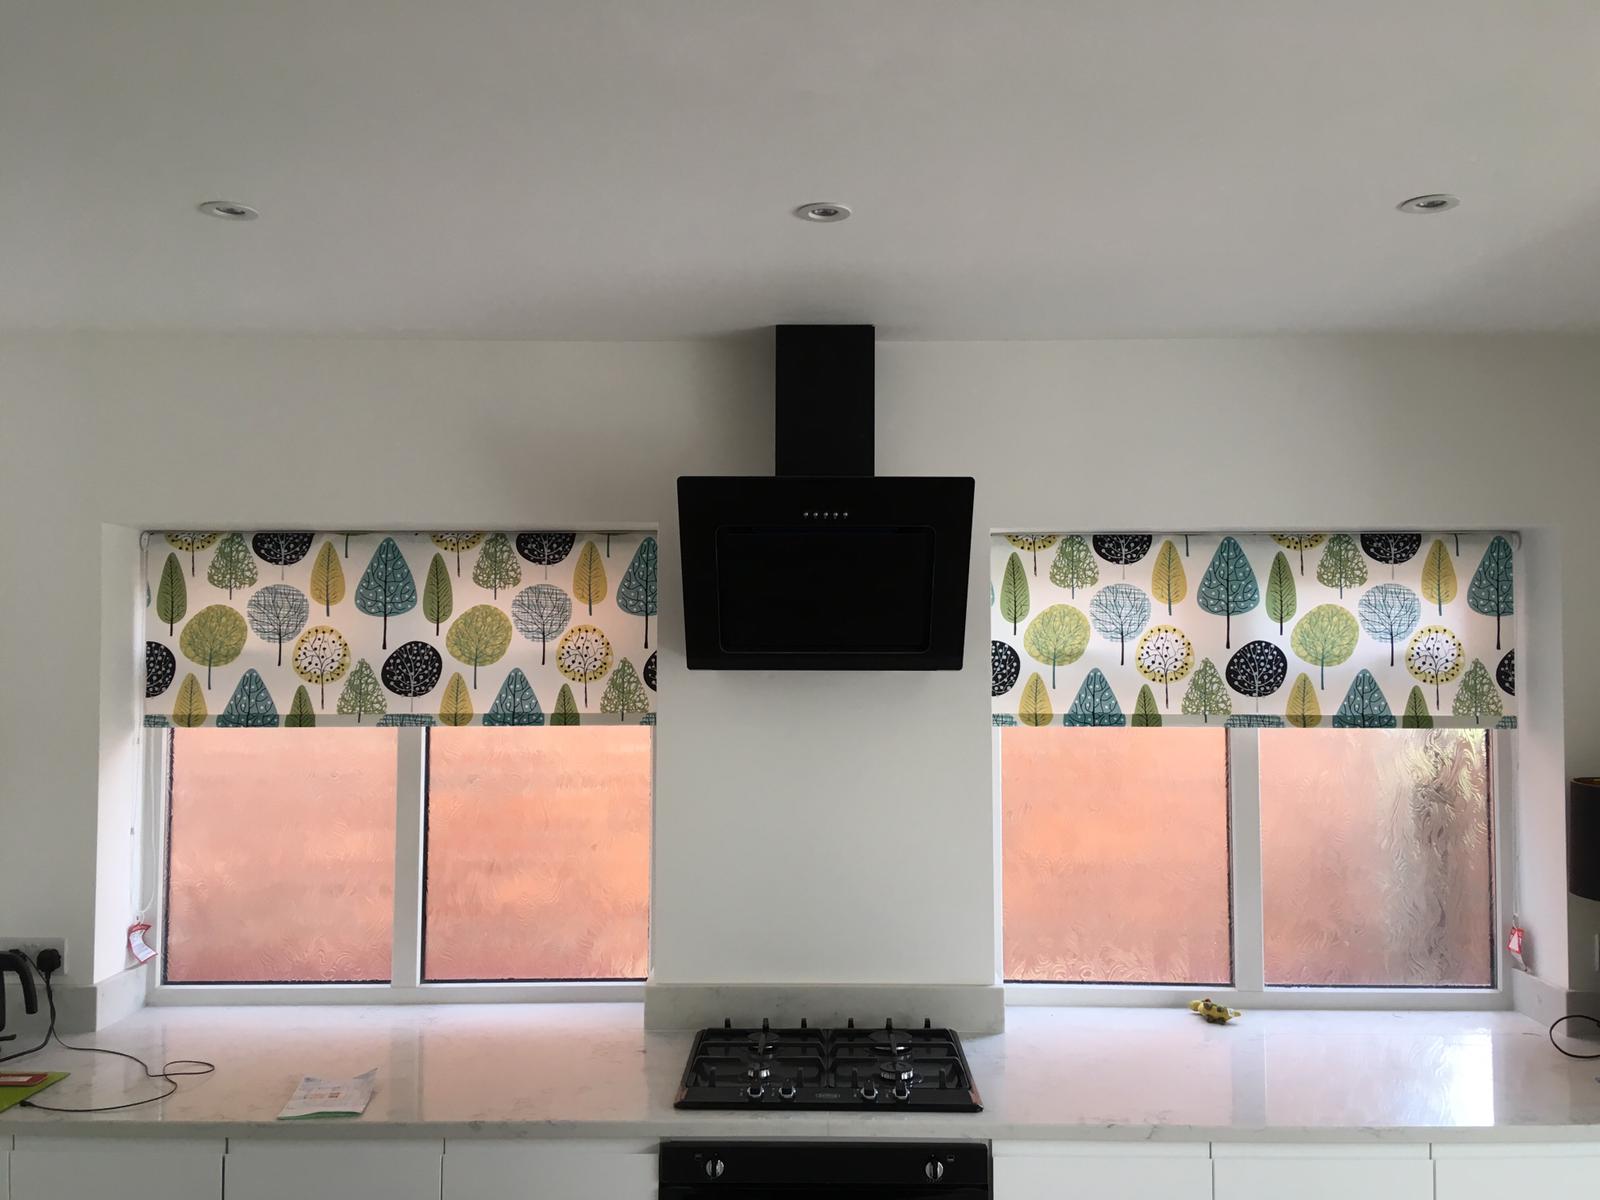 Suppliers of Roller Blinds With Shaped Bottom UK